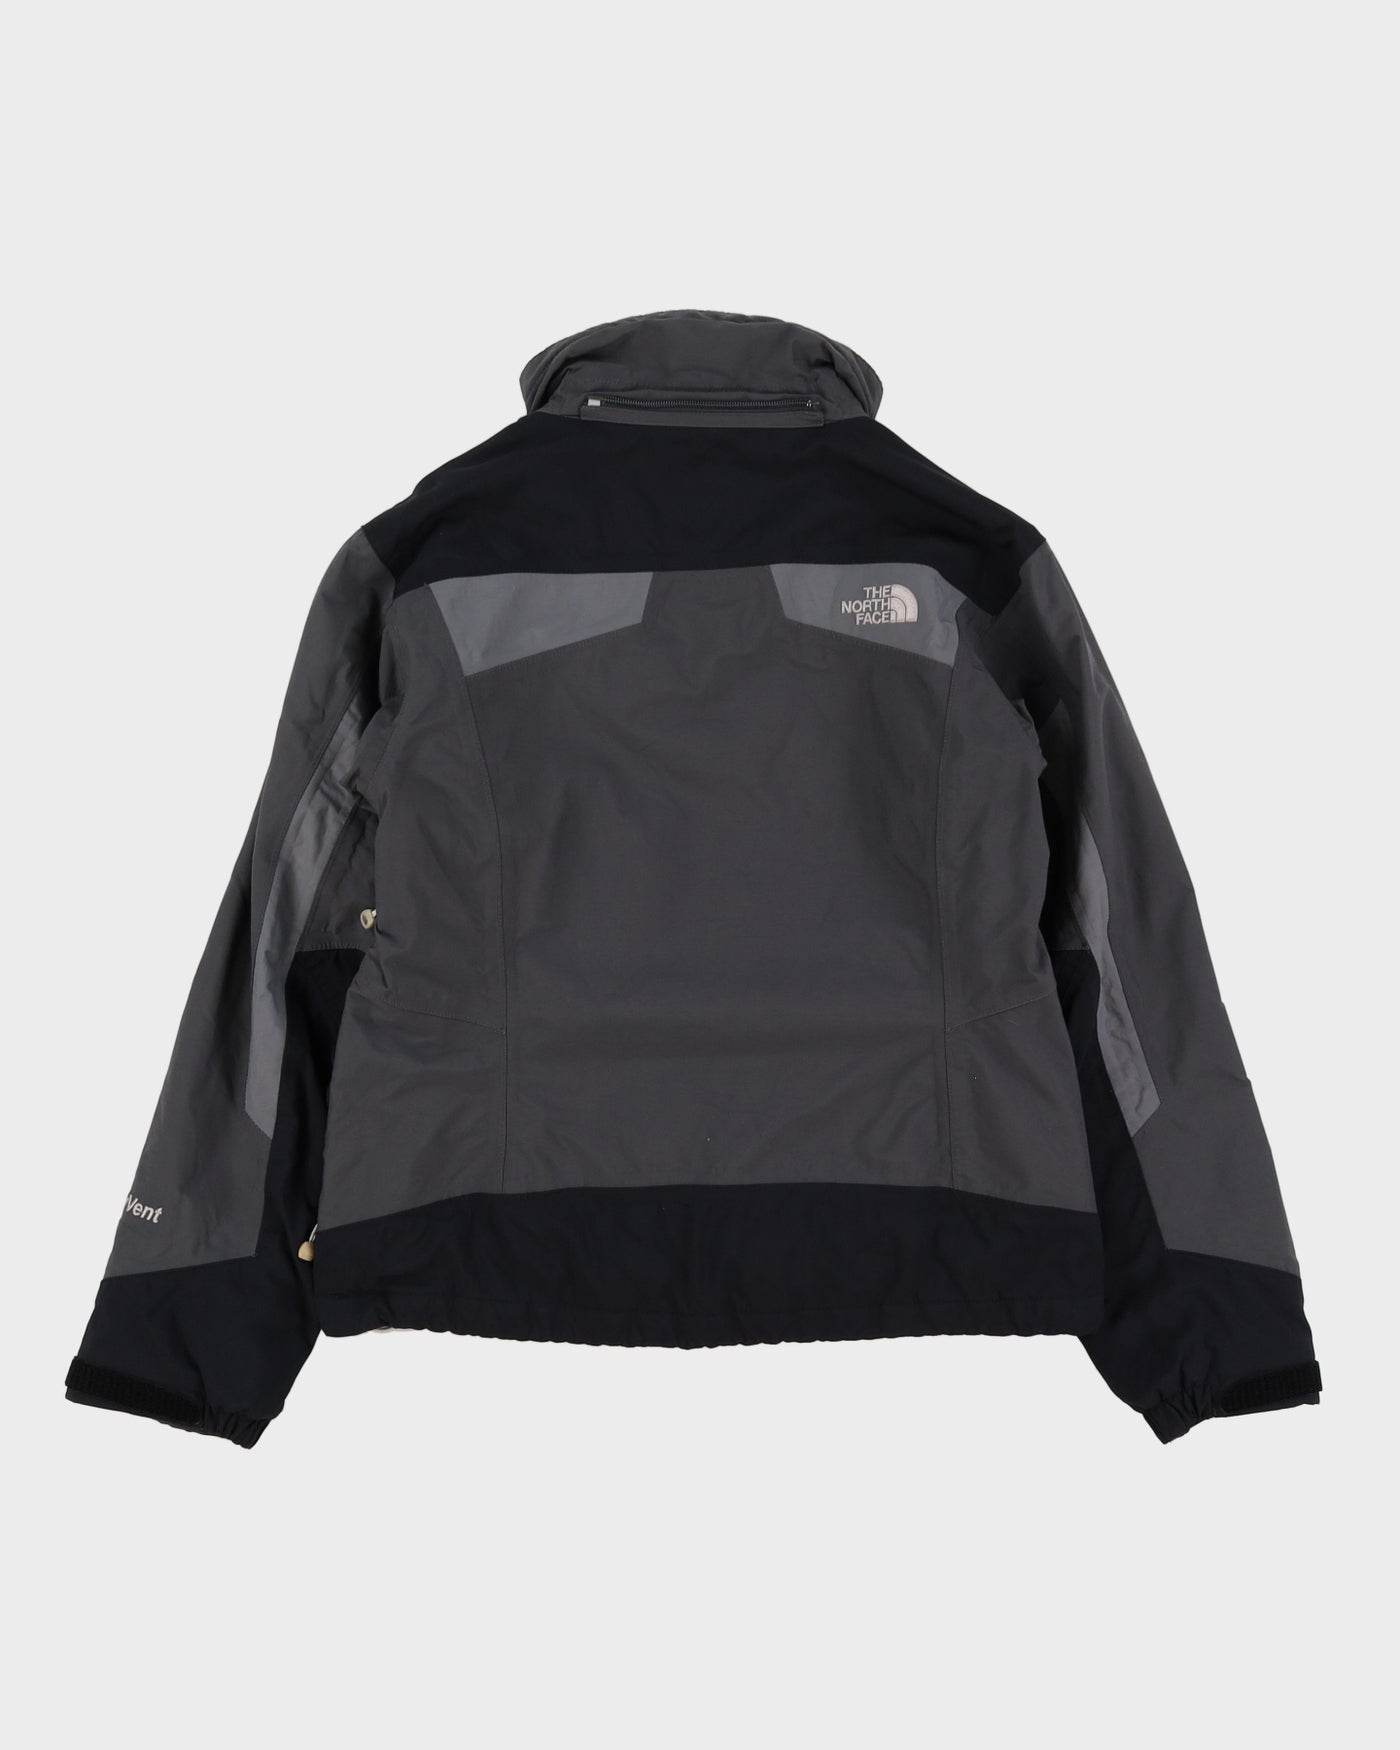 The North Face Grey And Black Ski Jacket - S